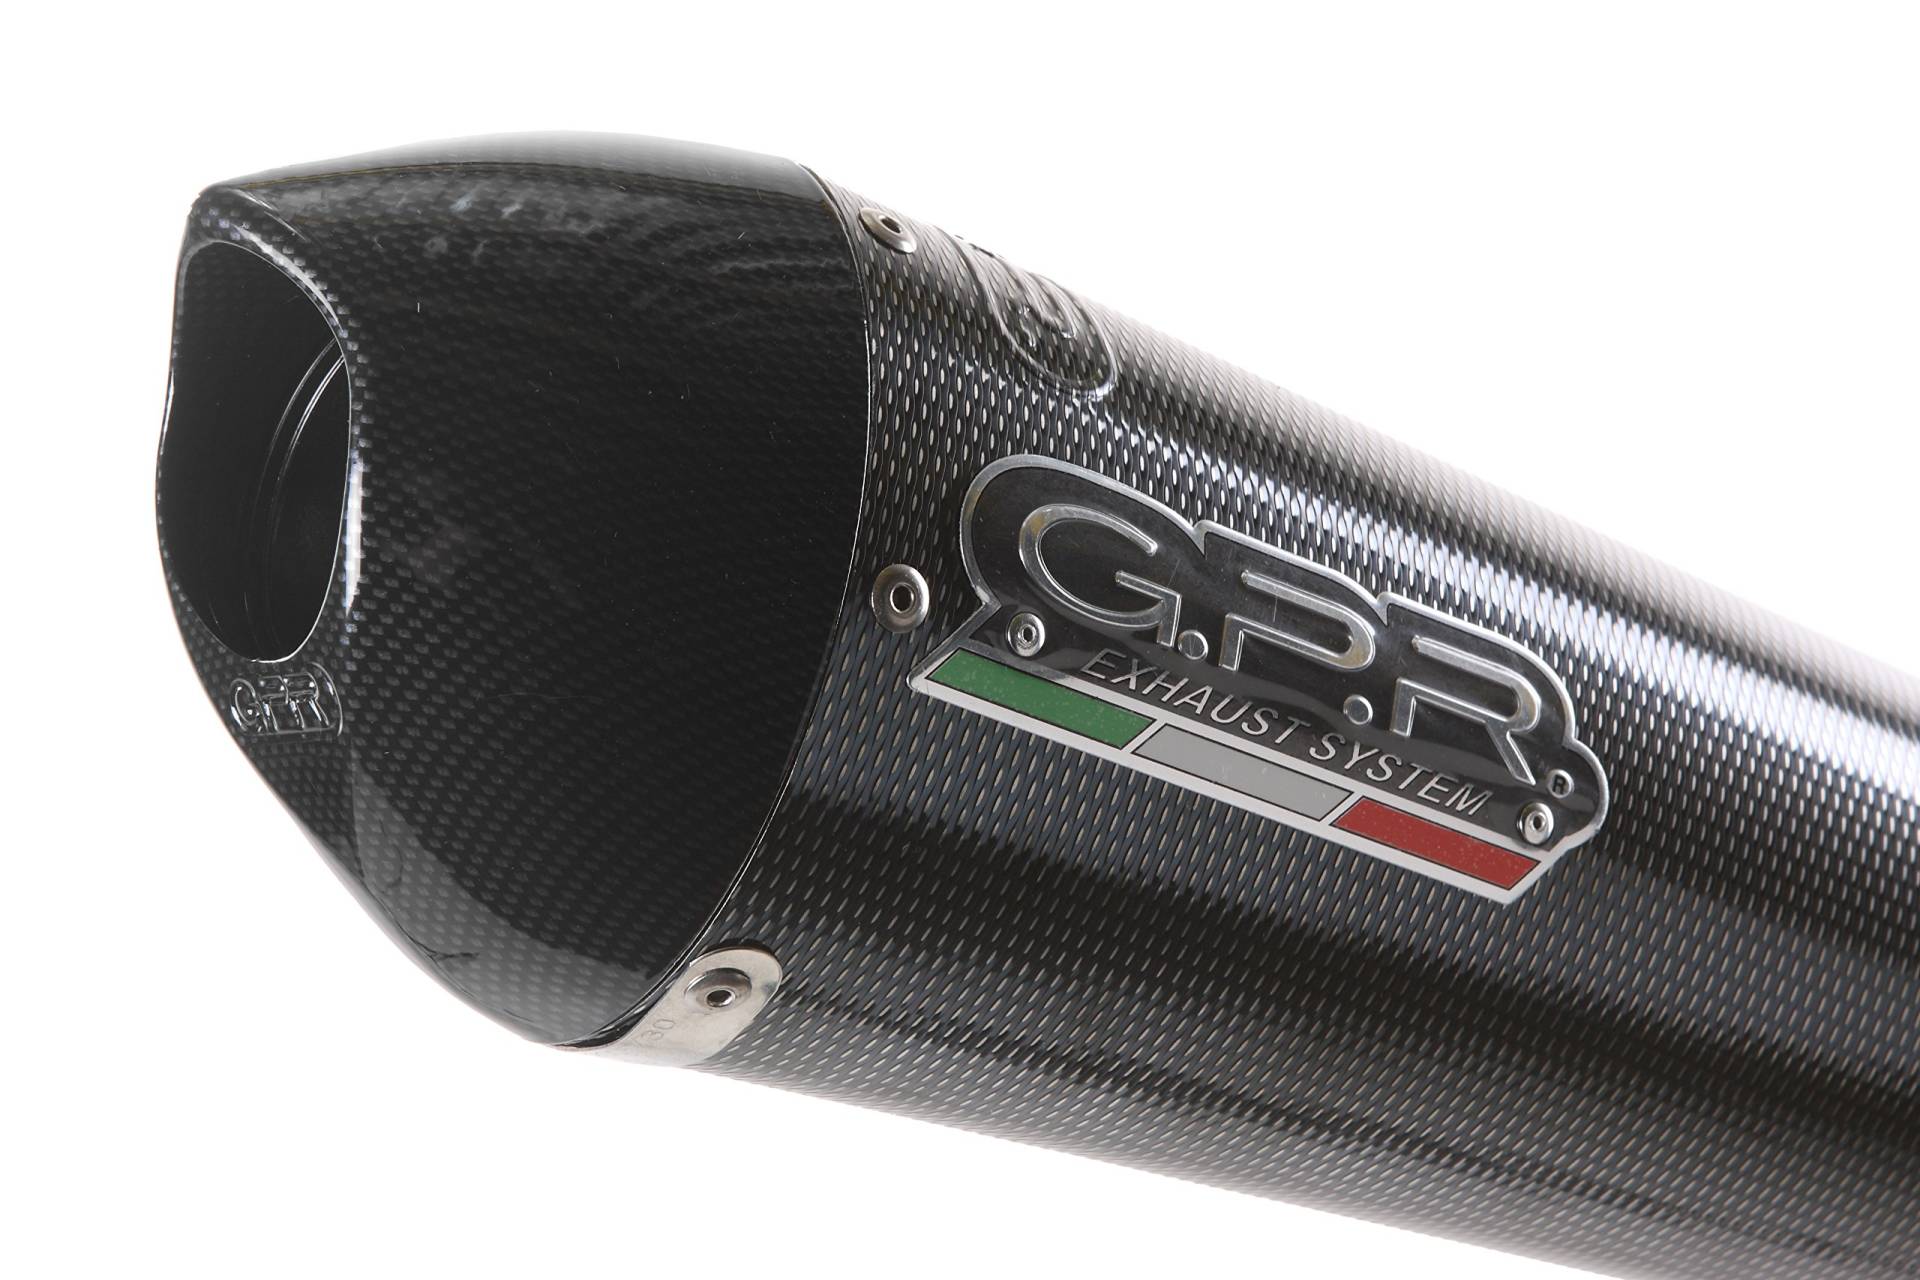 GPR Auspuff Endkappe – Yamaha YZF 1000 R1 2004/06 HOMOLOGATED Mid Full Exhaust System with Silencer with Catalyst by GPR Exhaust Systems der EVO Poppy Line von GPR EXHAUST SYSTEM